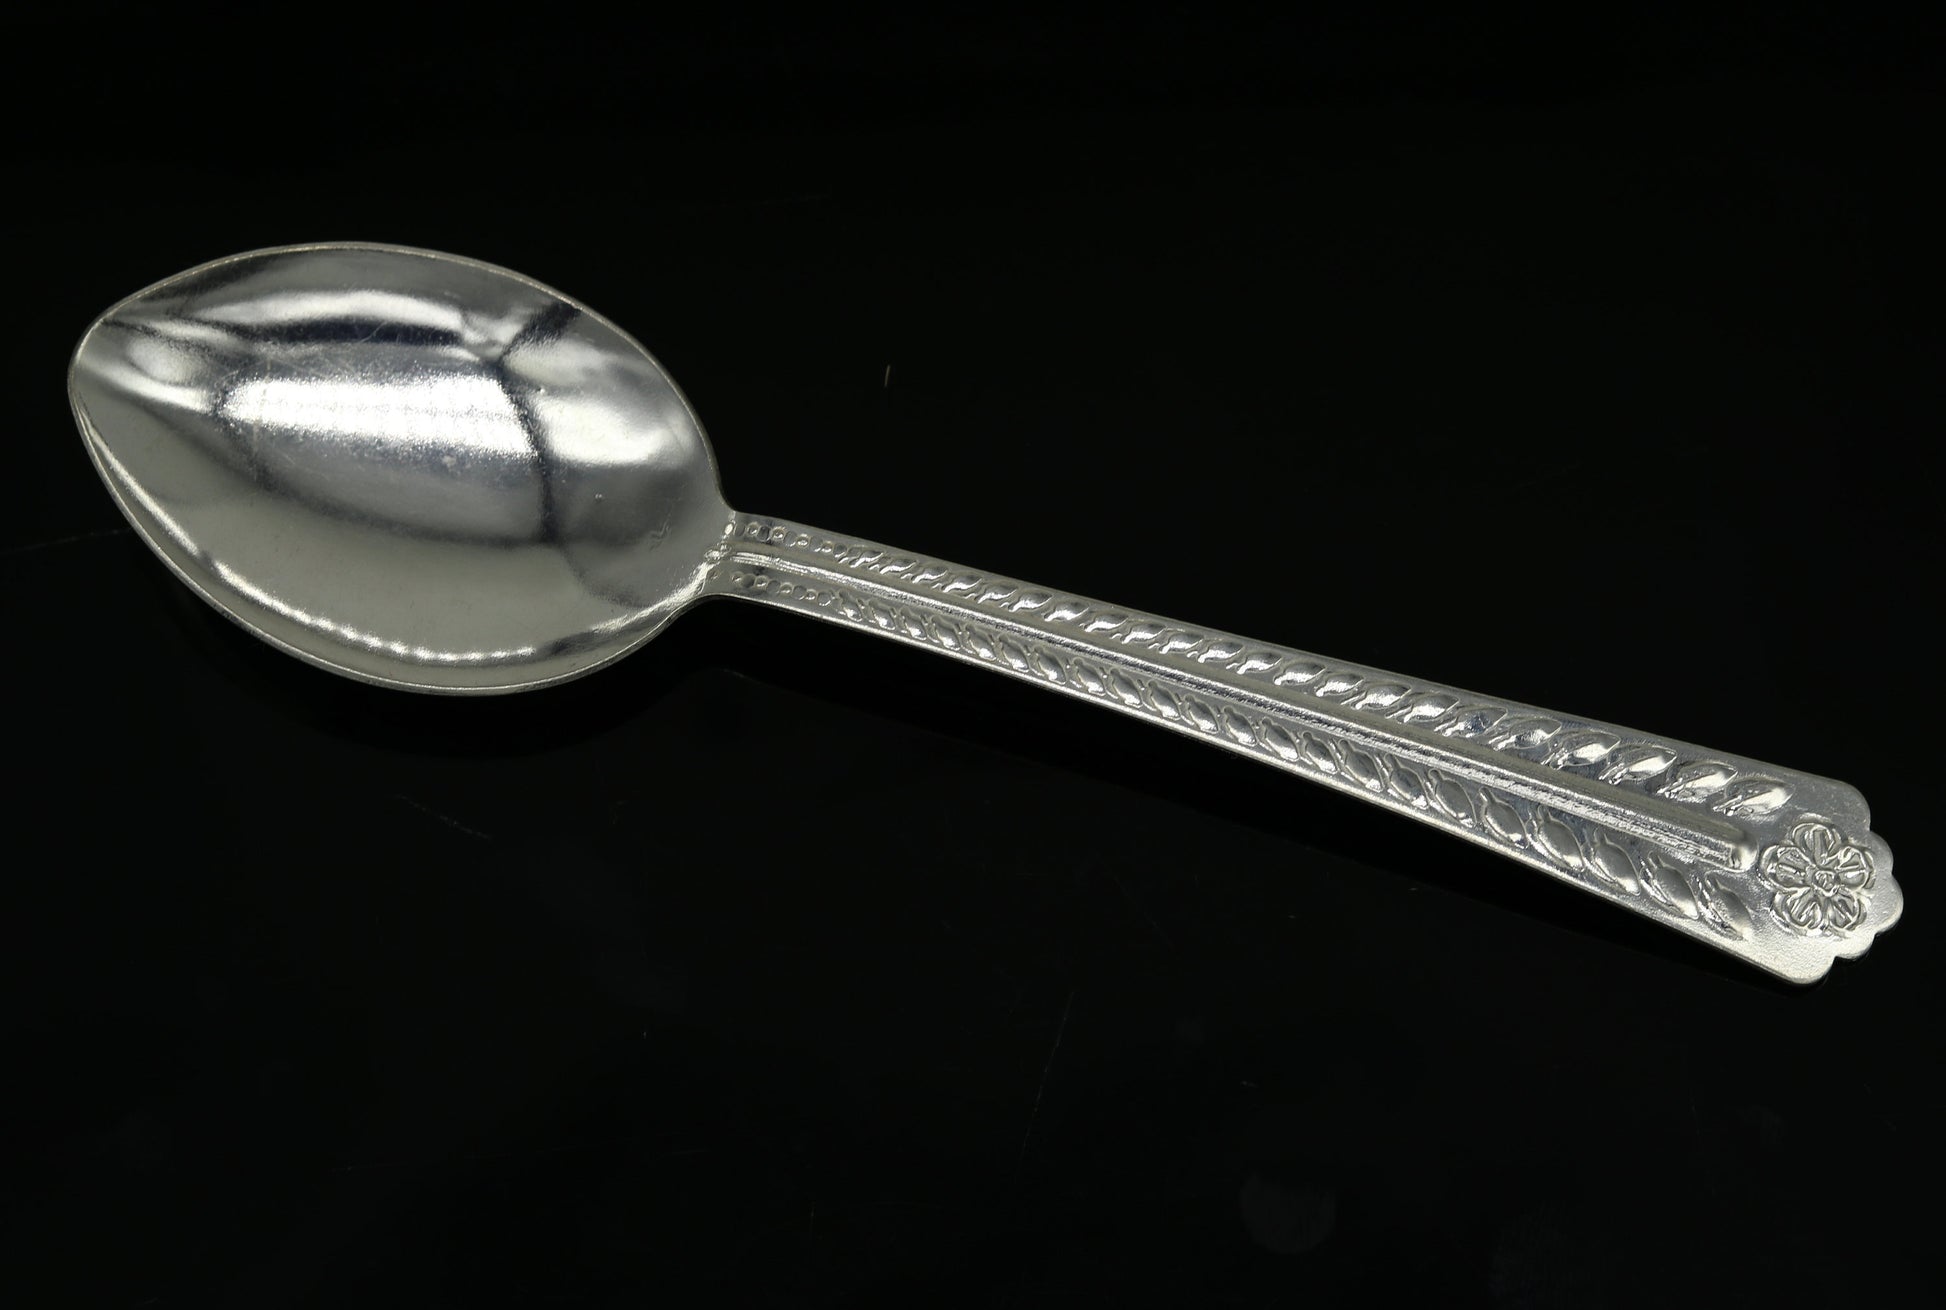 Pure sterling silver handmade solid silver 6" spoon kitchen utensils, vessels, silver has antibacterial properties, keep stay healthy sv58 - TRIBAL ORNAMENTS